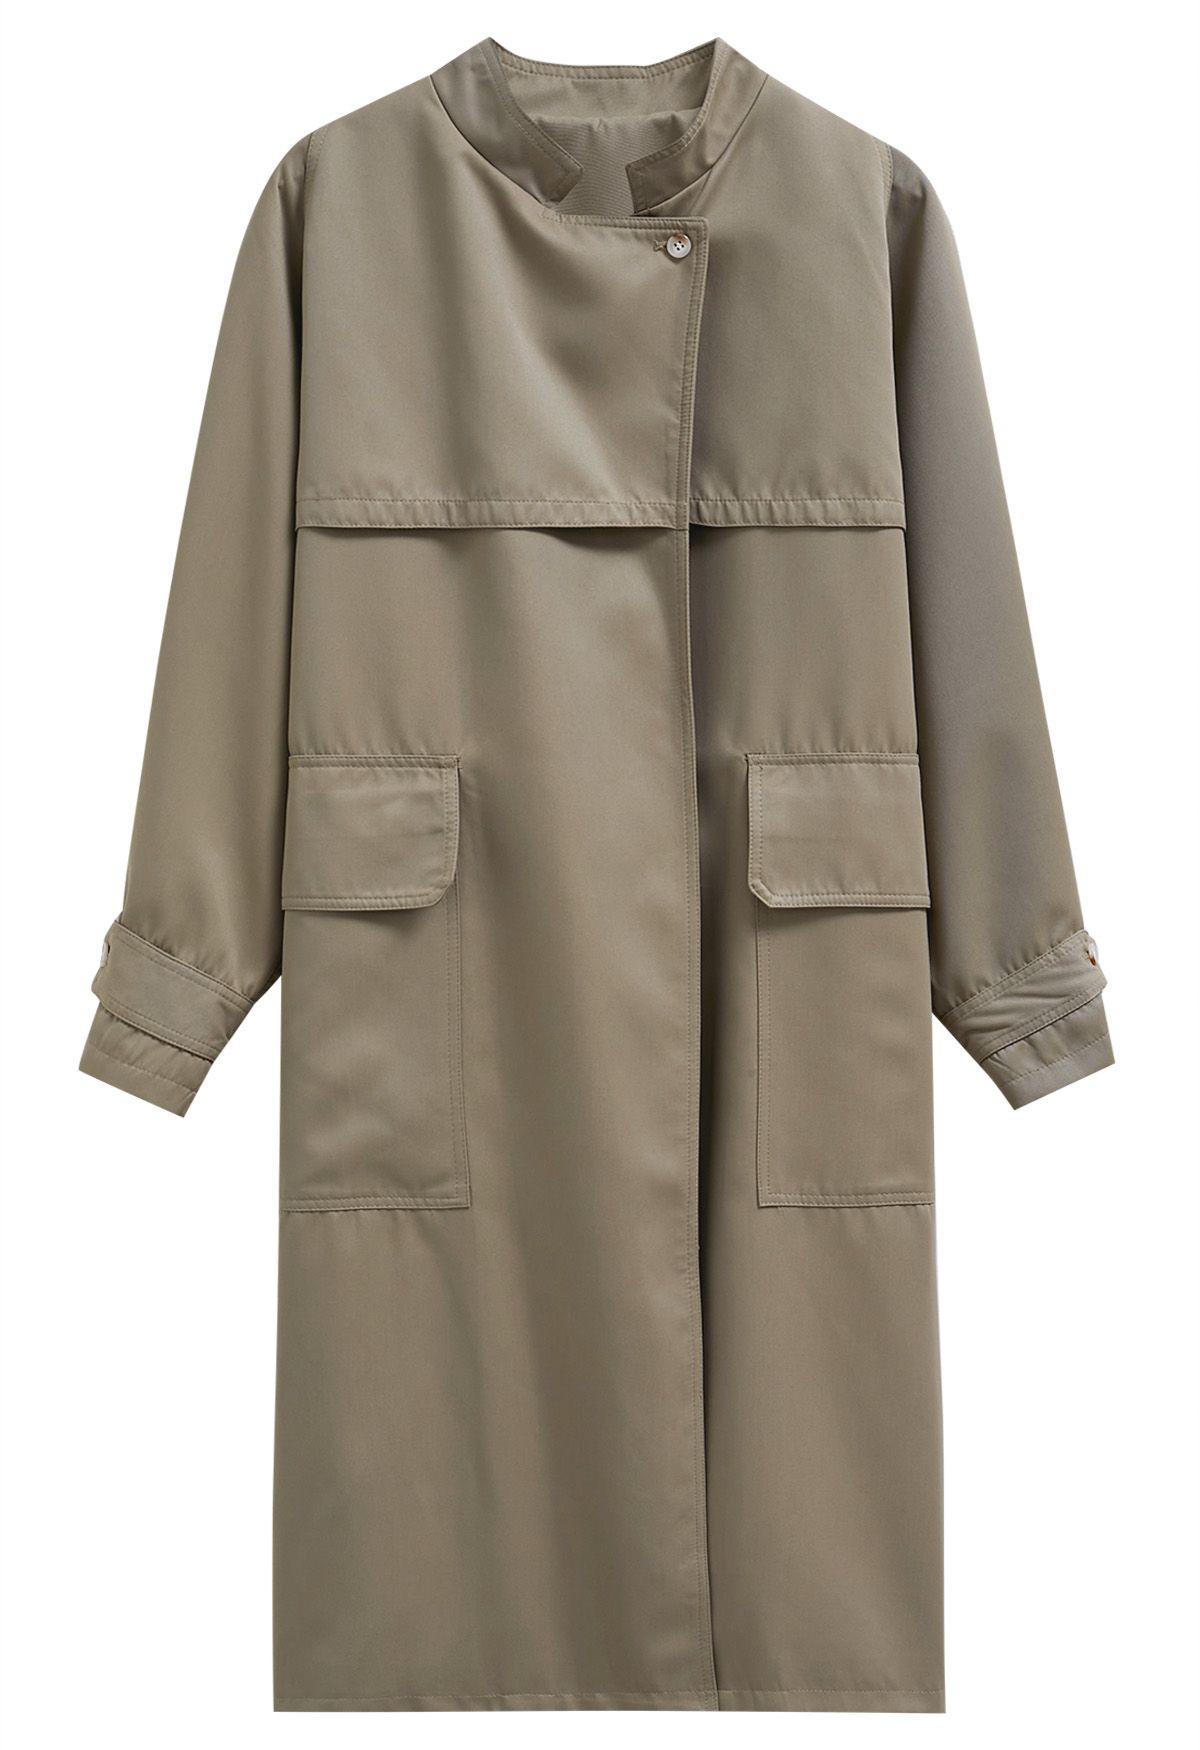 Ode to Autumn Belted Trench Coat in Khaki